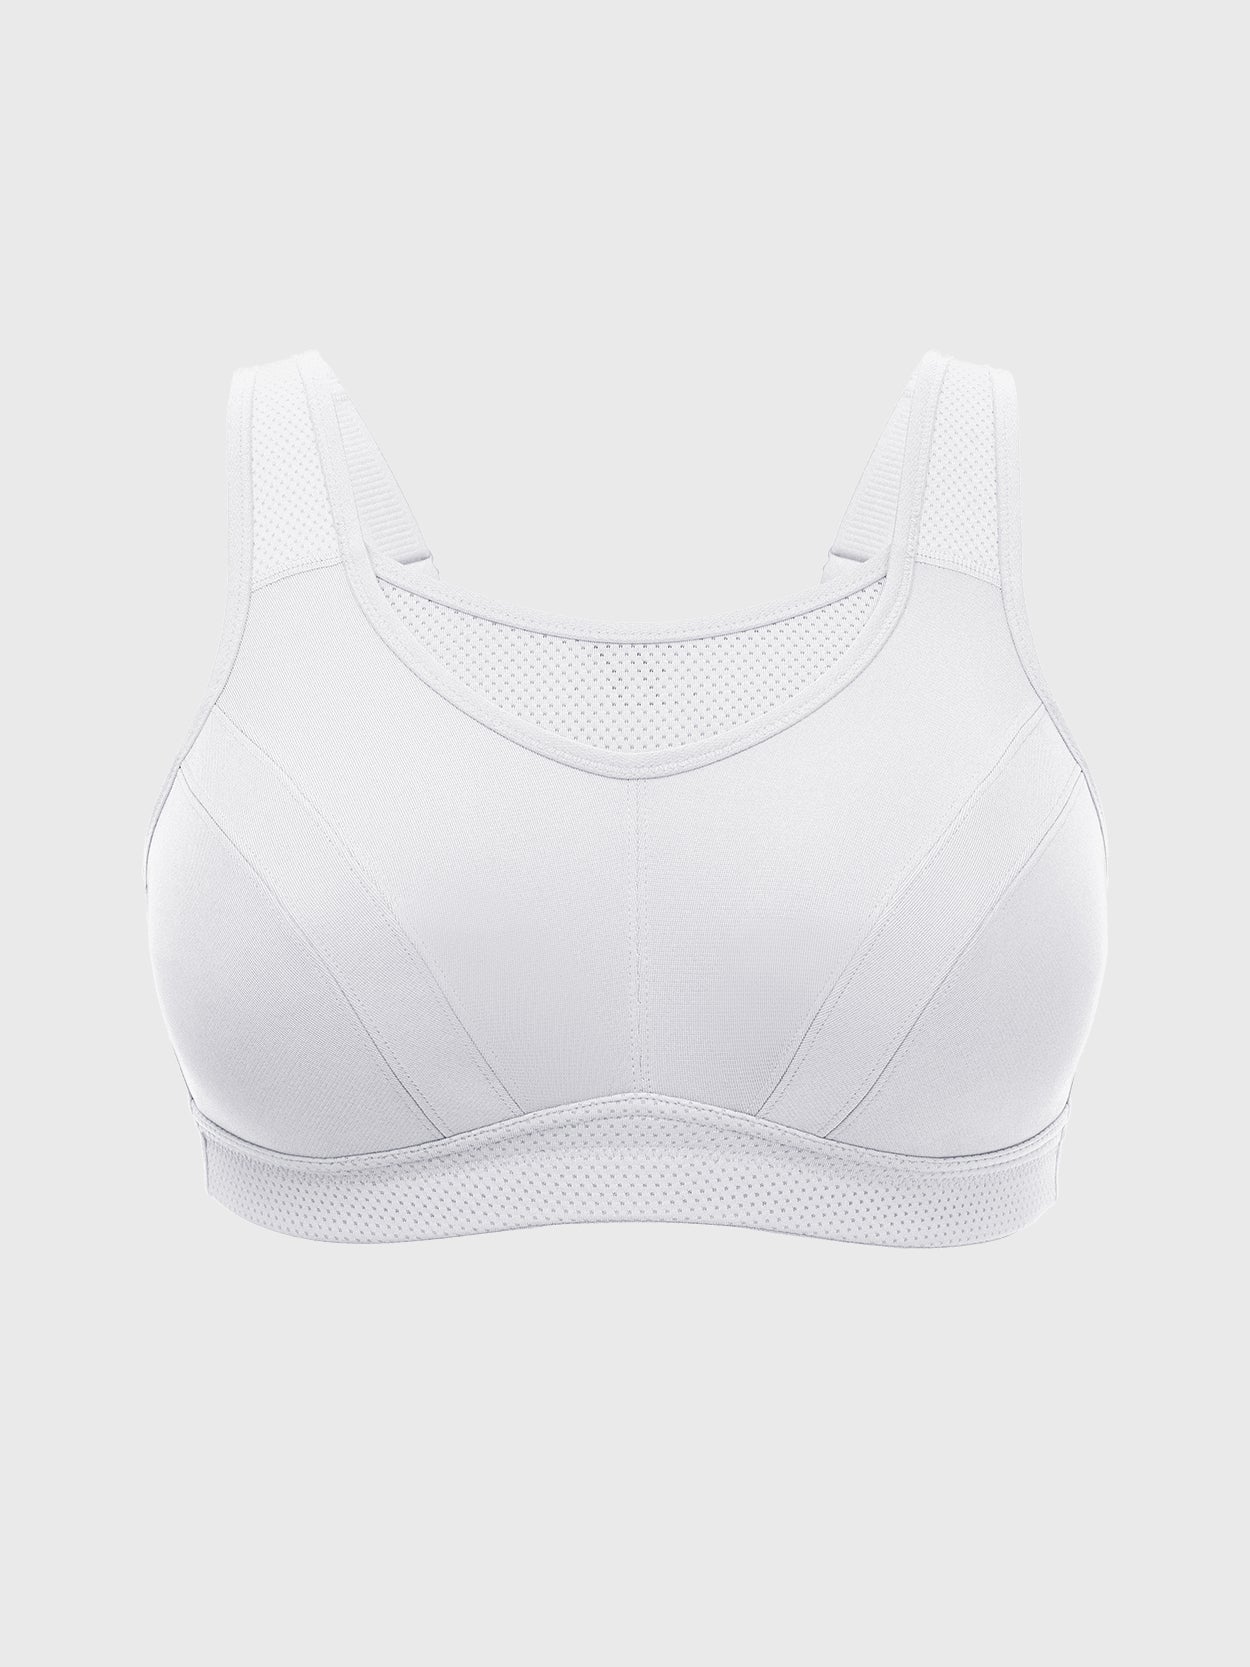 Sport Bras Women High Impact Non Padded with Underwire ，High Support Sports  Bra Sportswear Crop Top (Color : White, Size : 34D)